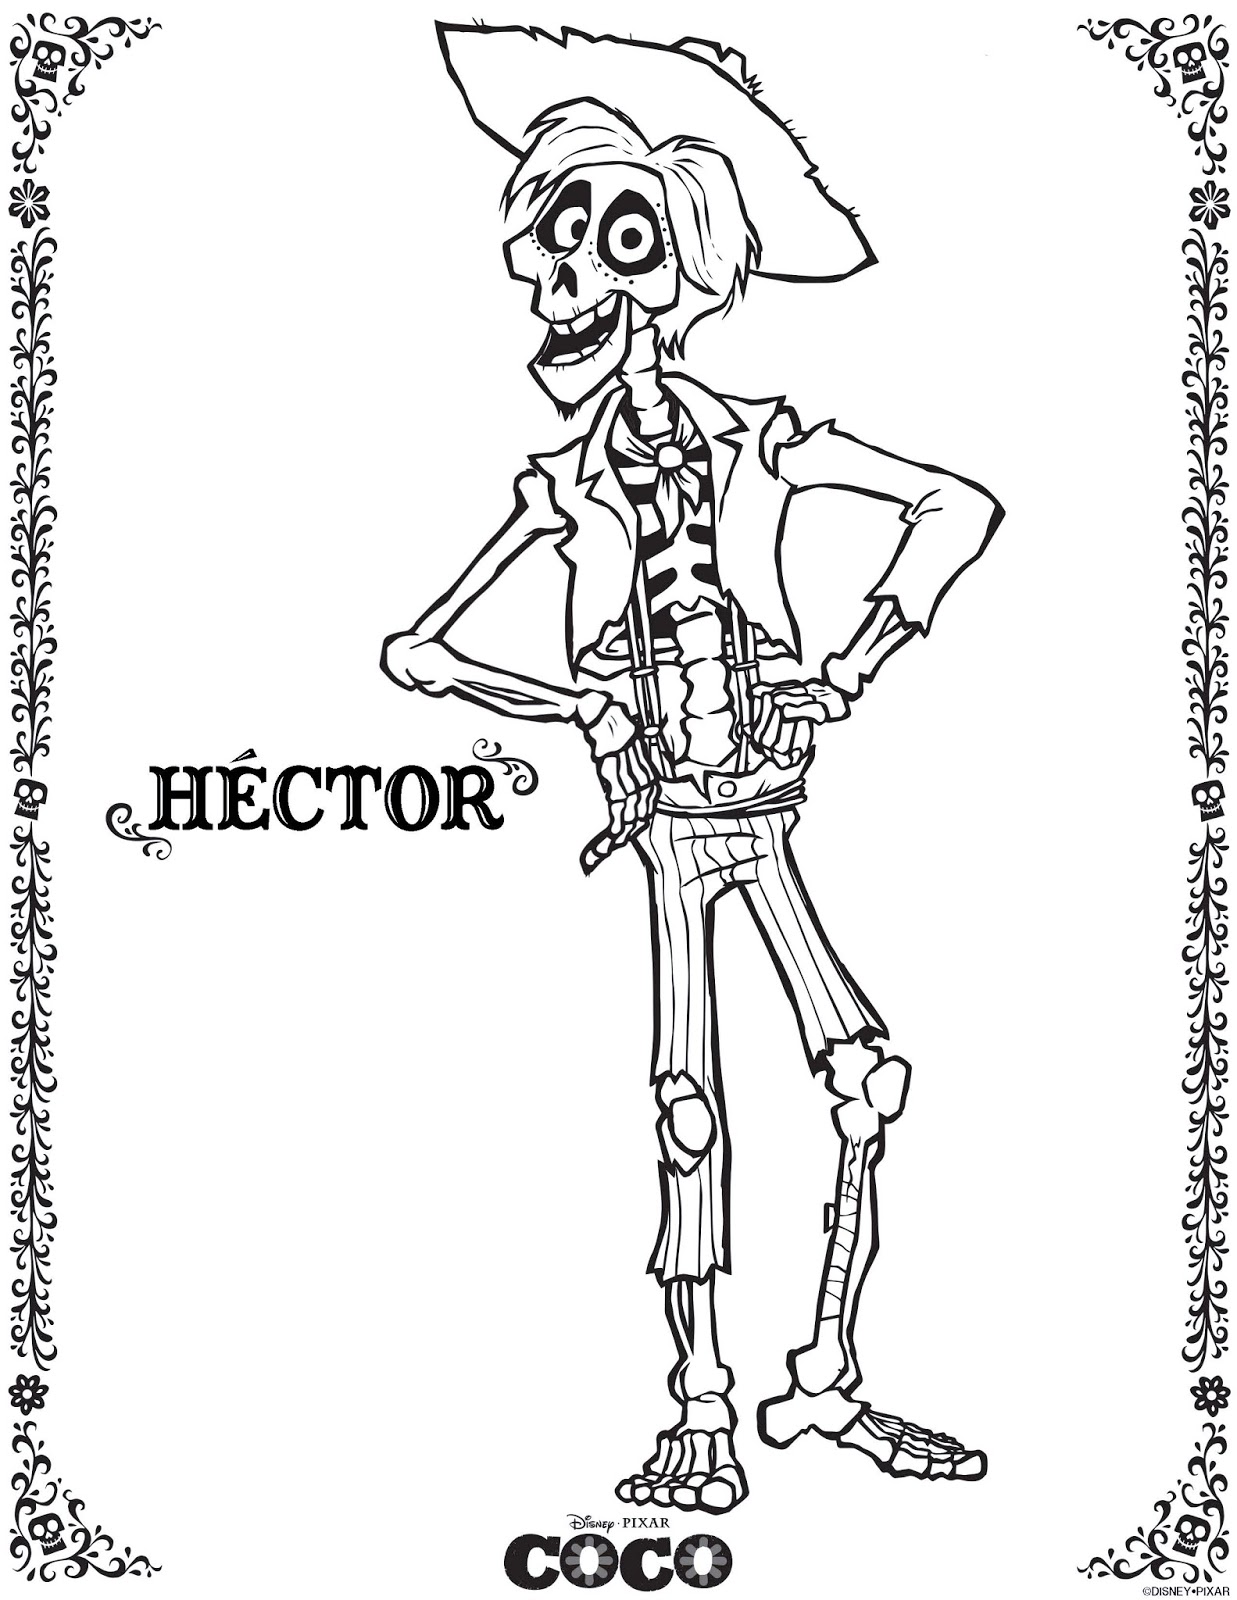 Free Coco coloring pages (Disney / Pixar) - Coco Kids Coloring Pages